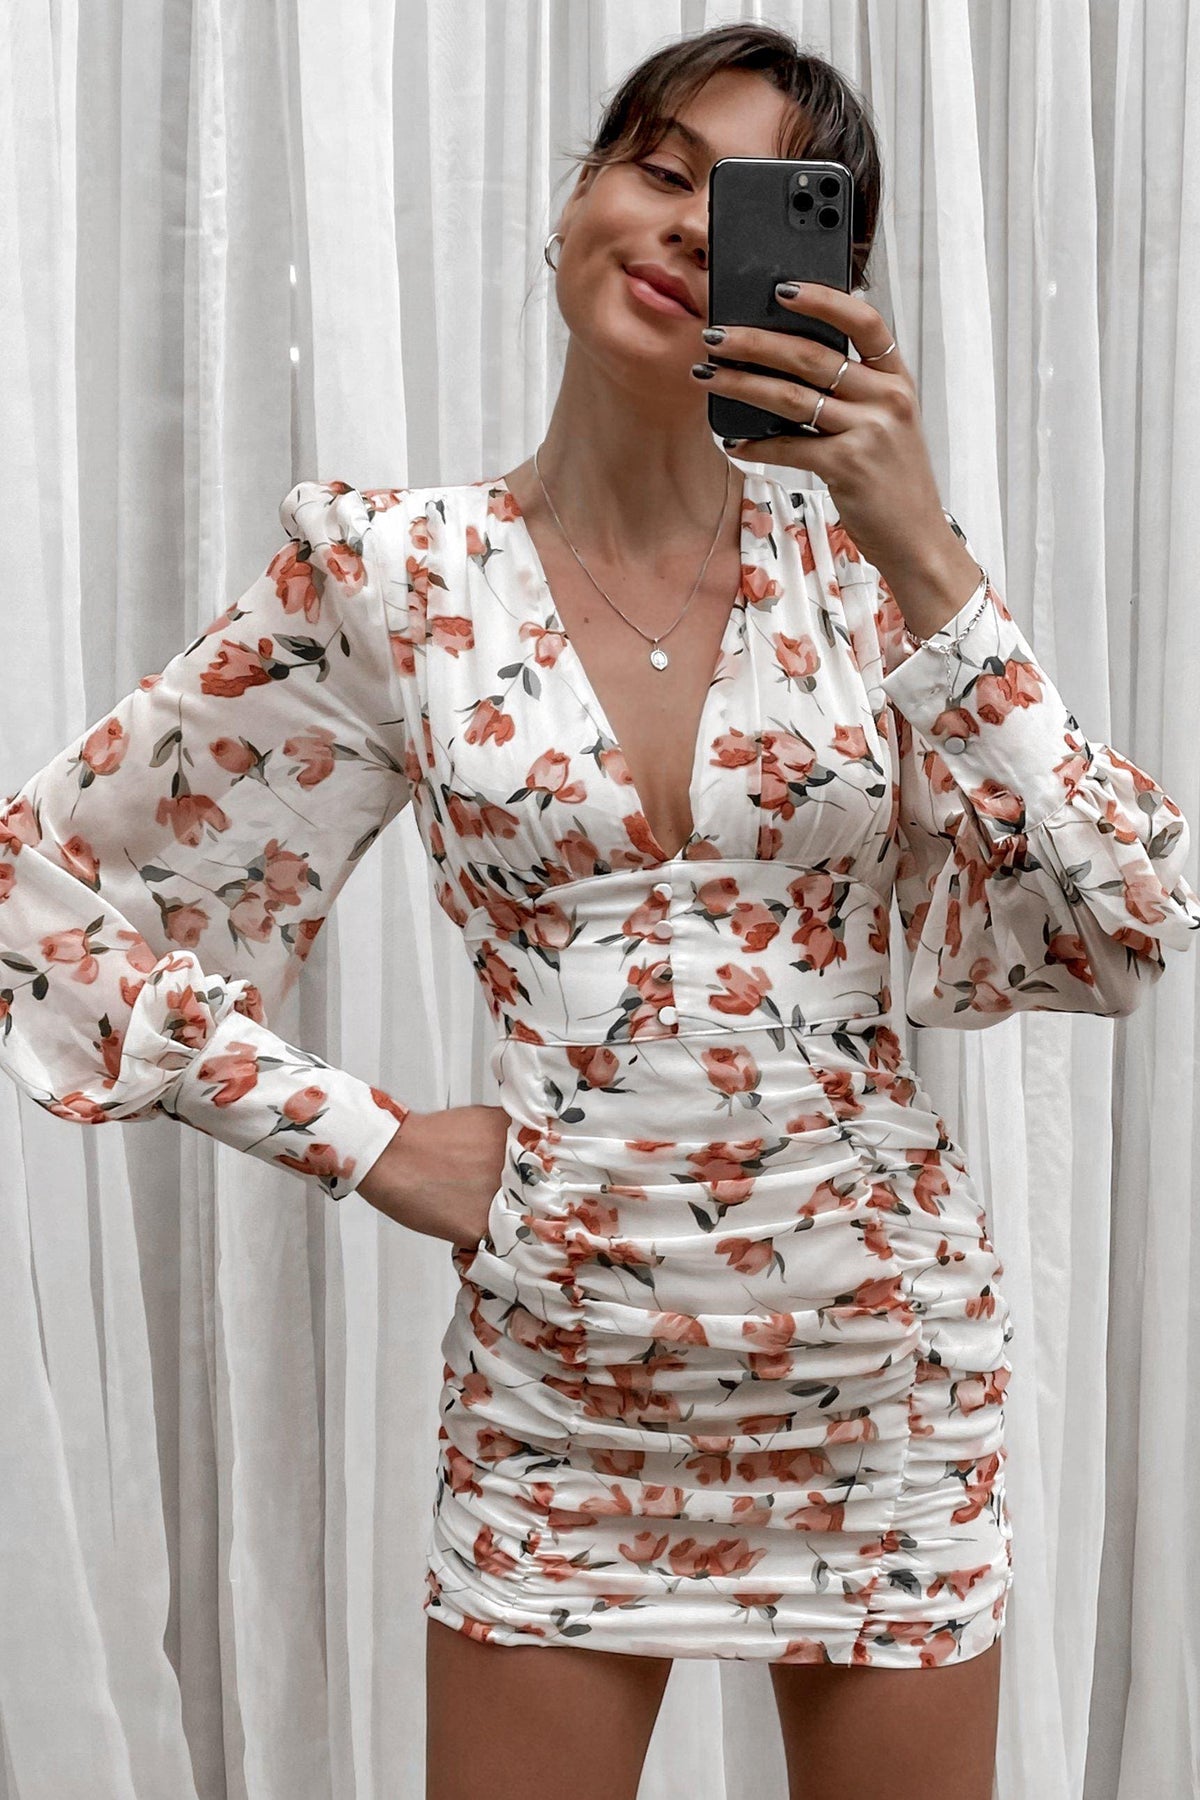 Untamed Dress, BALLOON SLEEVE, DRESS, DRESSES, FLORAL, GATHERED, LONG SLEEVE, PINK, POLYESTER, PRINT, Sale, WHITE, Untamed Dress only $131.00 @ MISHKAH ONLINE FASHION BOUTIQUE, Shop The Latest Women&#39;s Dresses - Our New Untamed Dress is only $131.00, @ MISHKAH ONLINE FASHION BOUTIQUE-MISHKAH